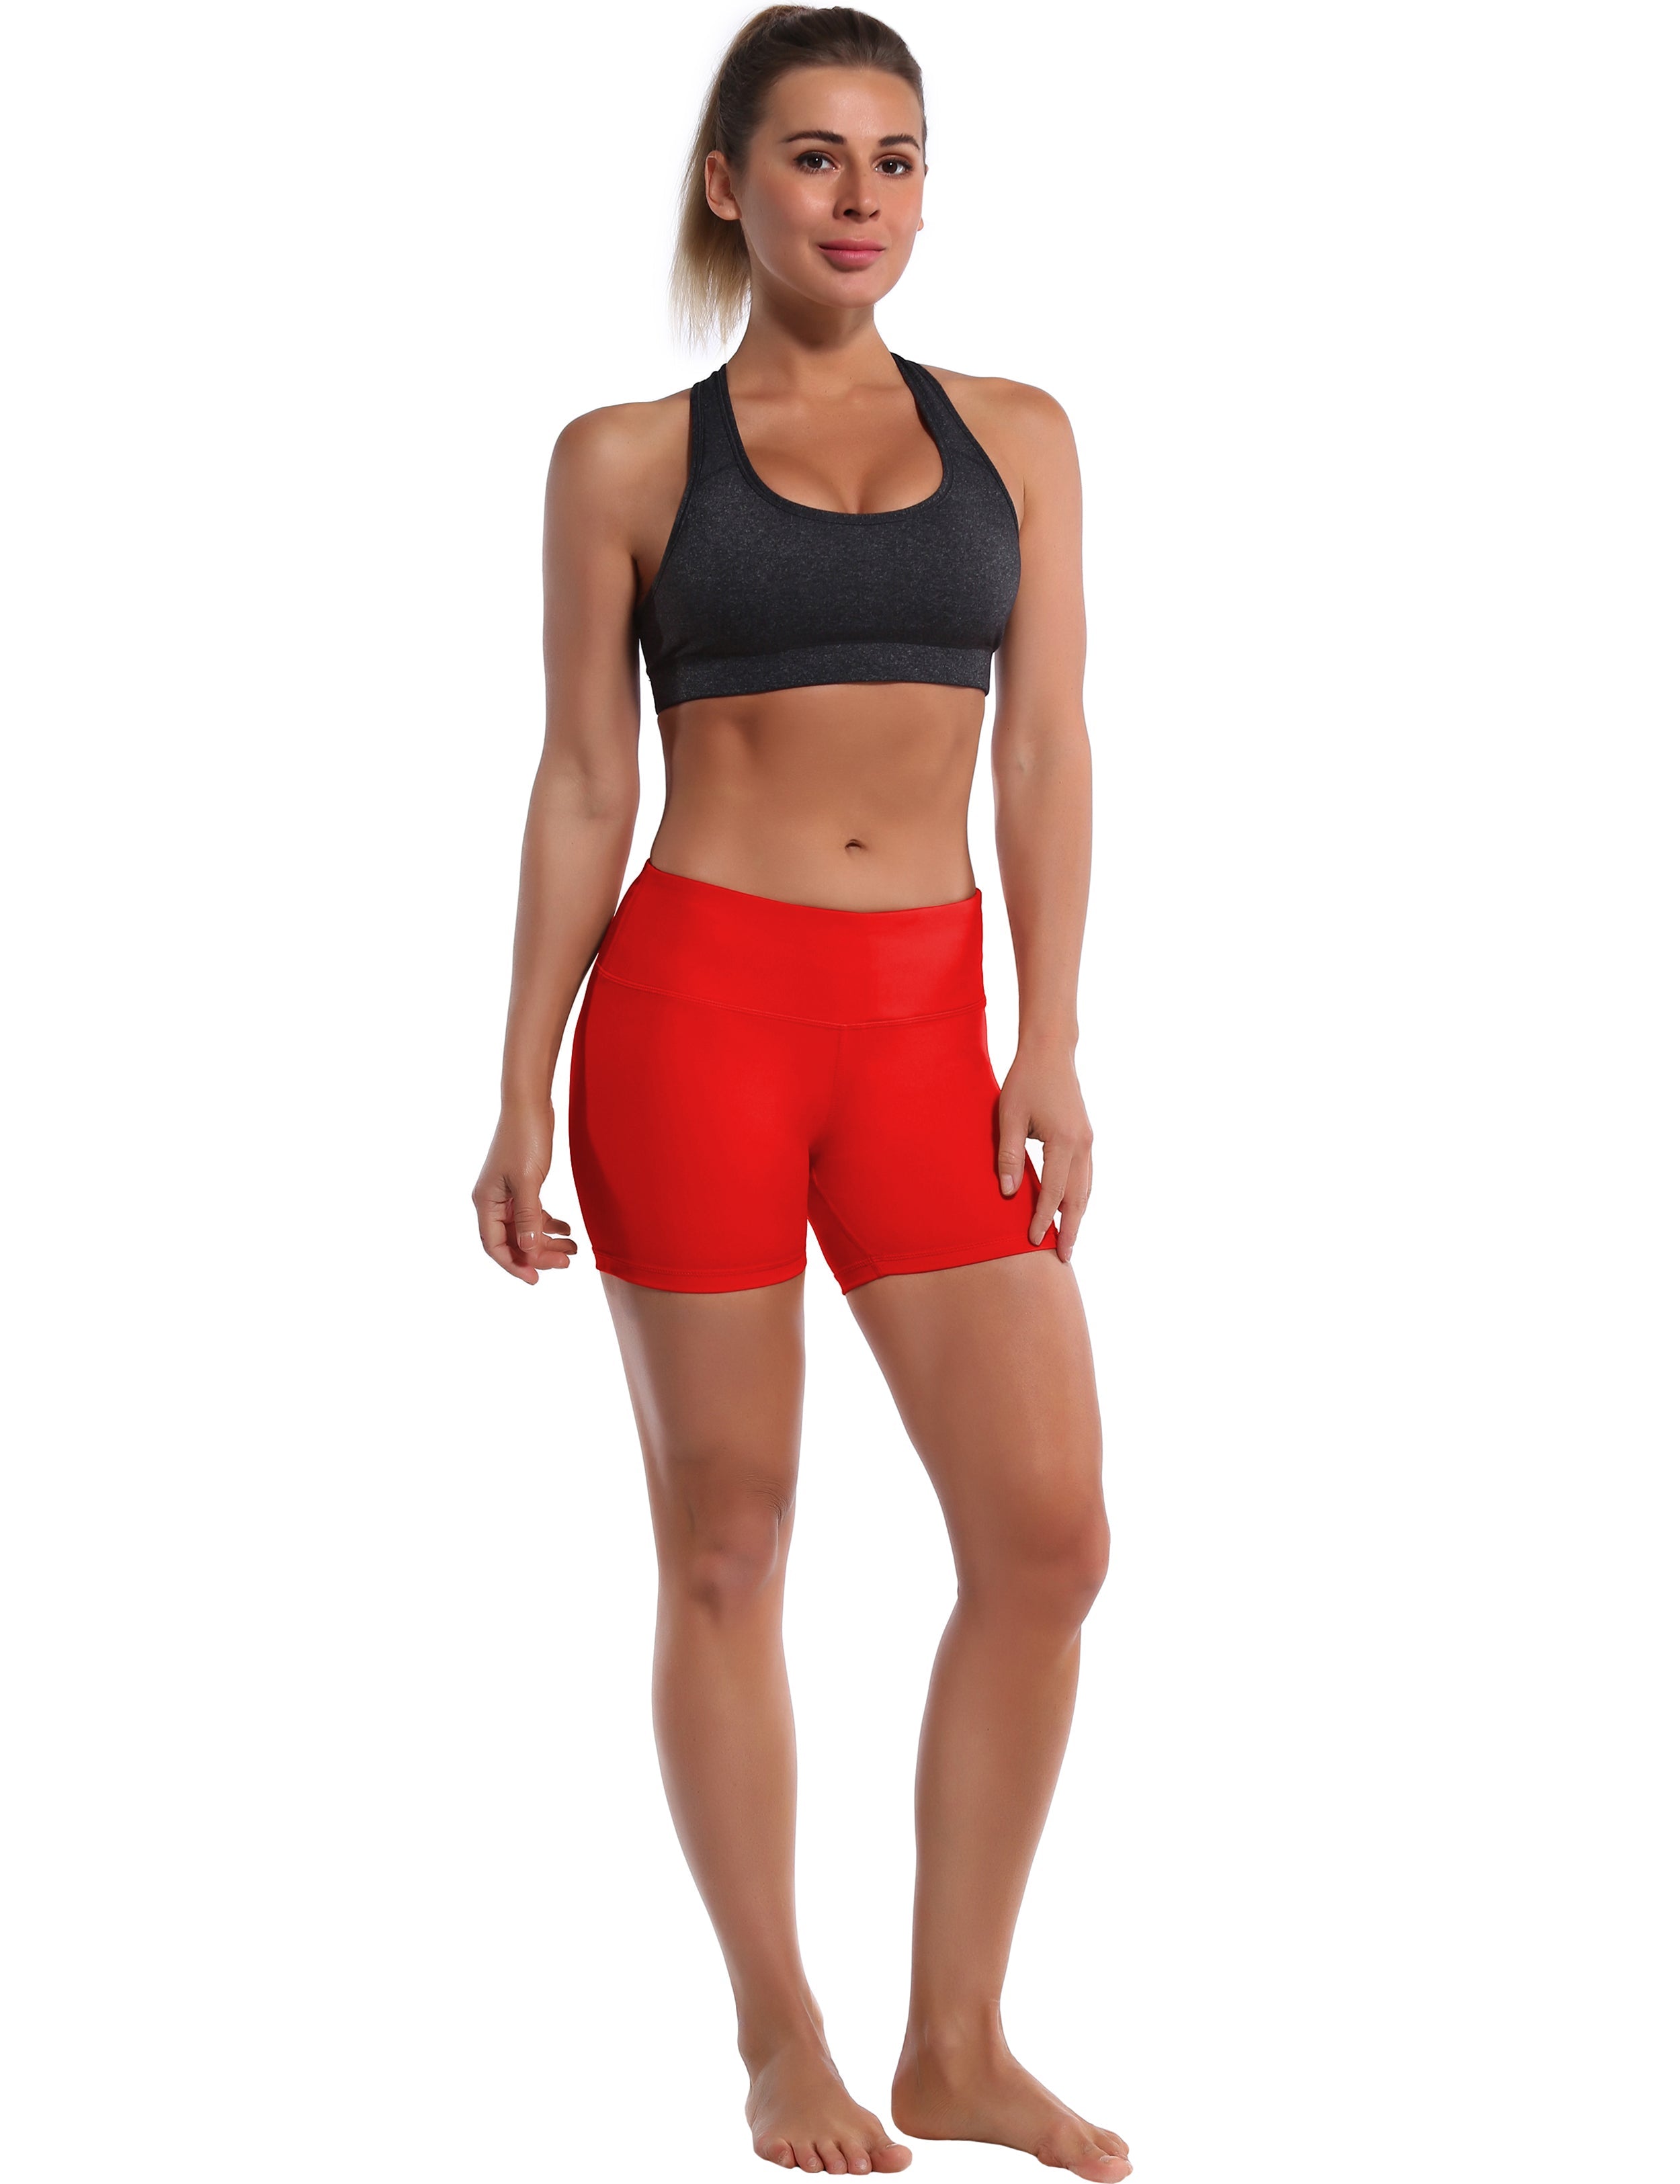 4" Biking Shorts scarlet Sleek, soft, smooth and totally comfortable: our newest style is here. Softest-ever fabric High elasticity High density 4-way stretch Fabric doesn't attract lint easily No see-through Moisture-wicking Machine wash 75% Nylon, 25% Spandex